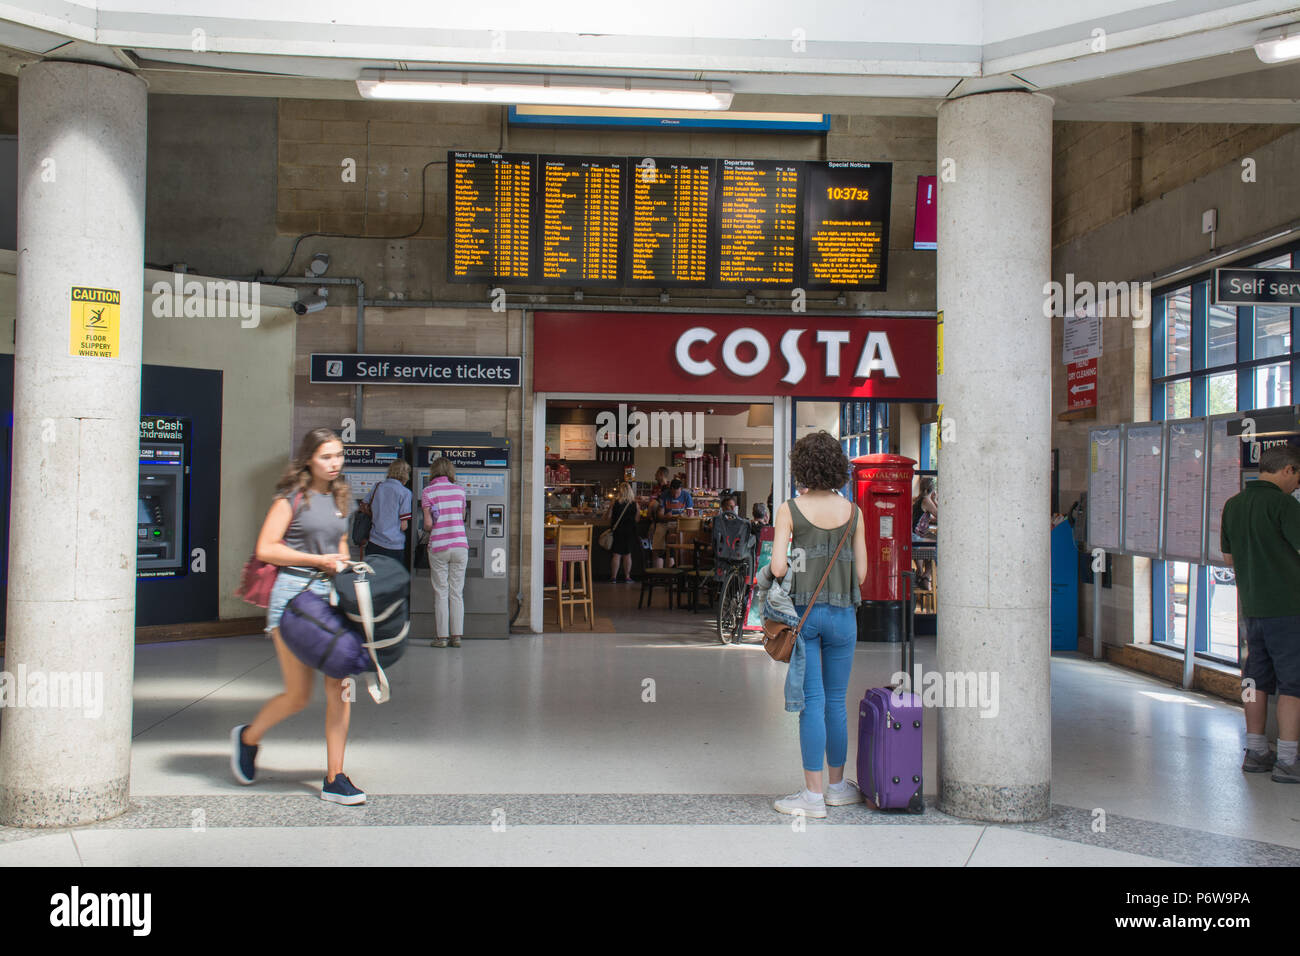 Inside the ticket office at Guildford railway station, with a Costa coffee shop and passengers buying tickets from self-service machines, Surrey, UK Stock Photo